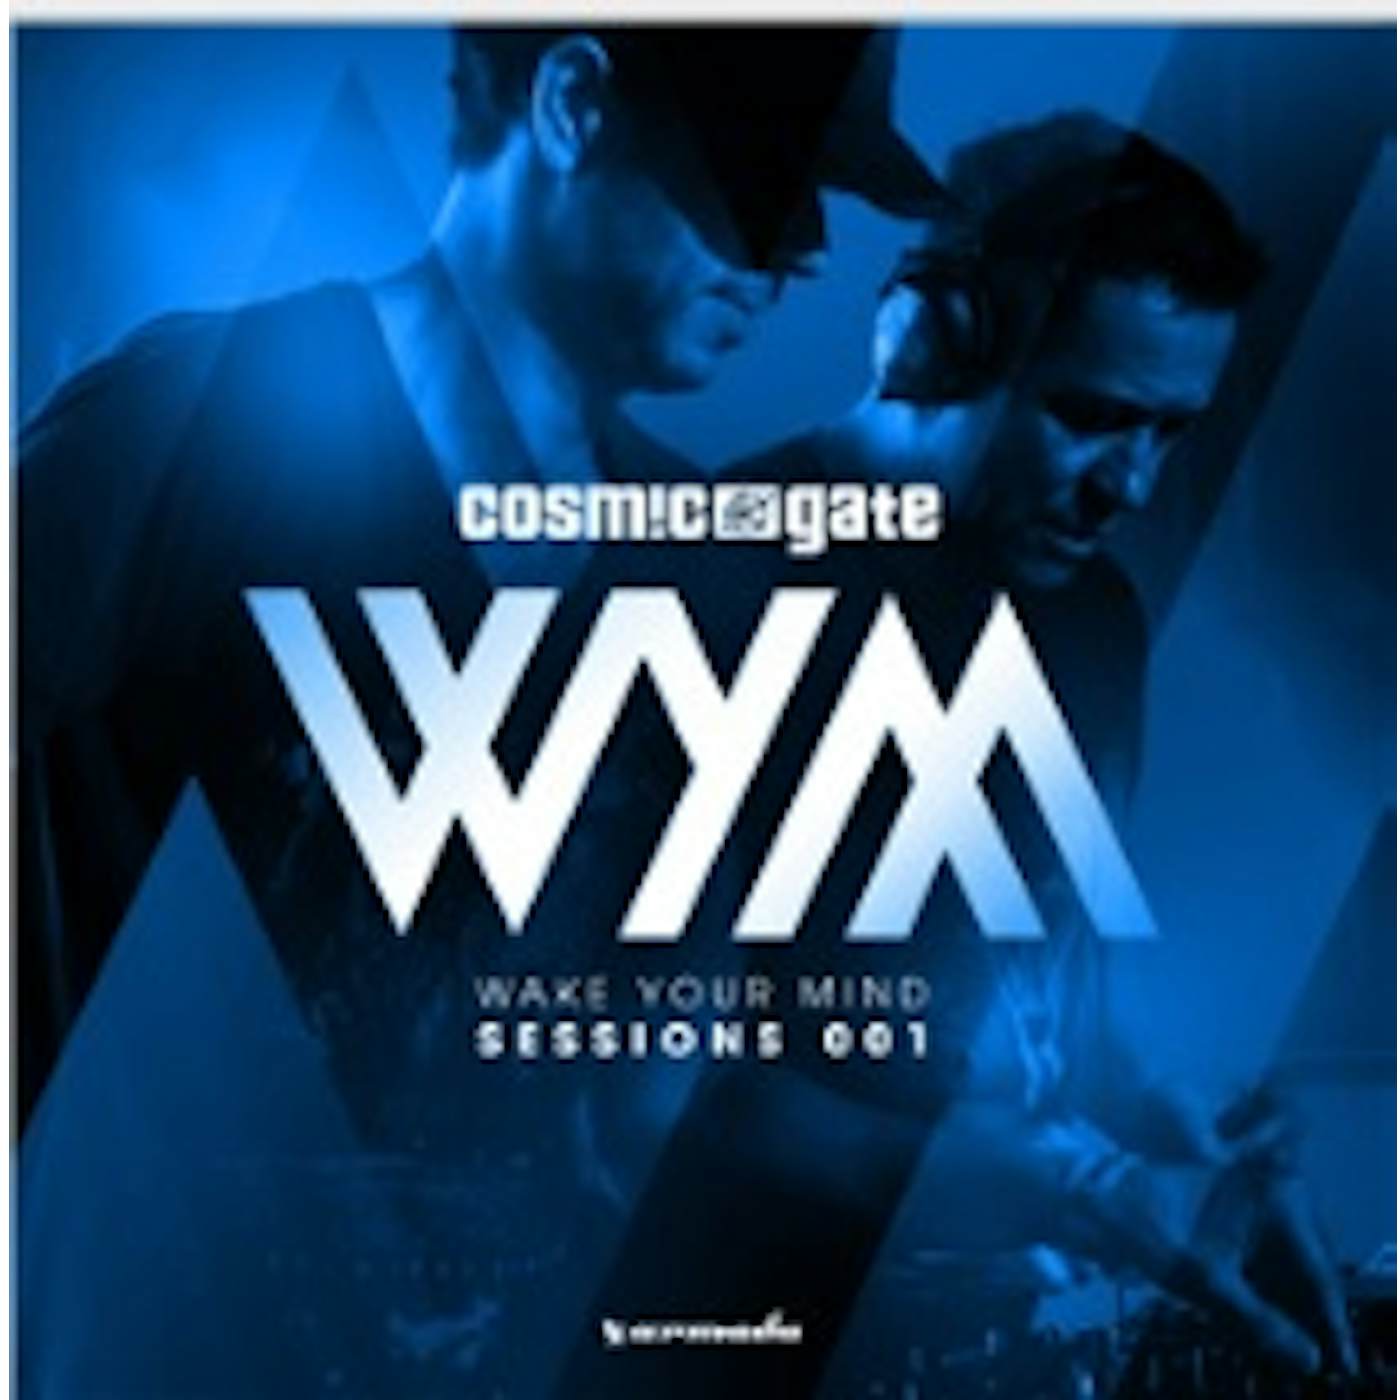 Cosmic Gate WAKE YOUR MIND SESSIONS 001 CD